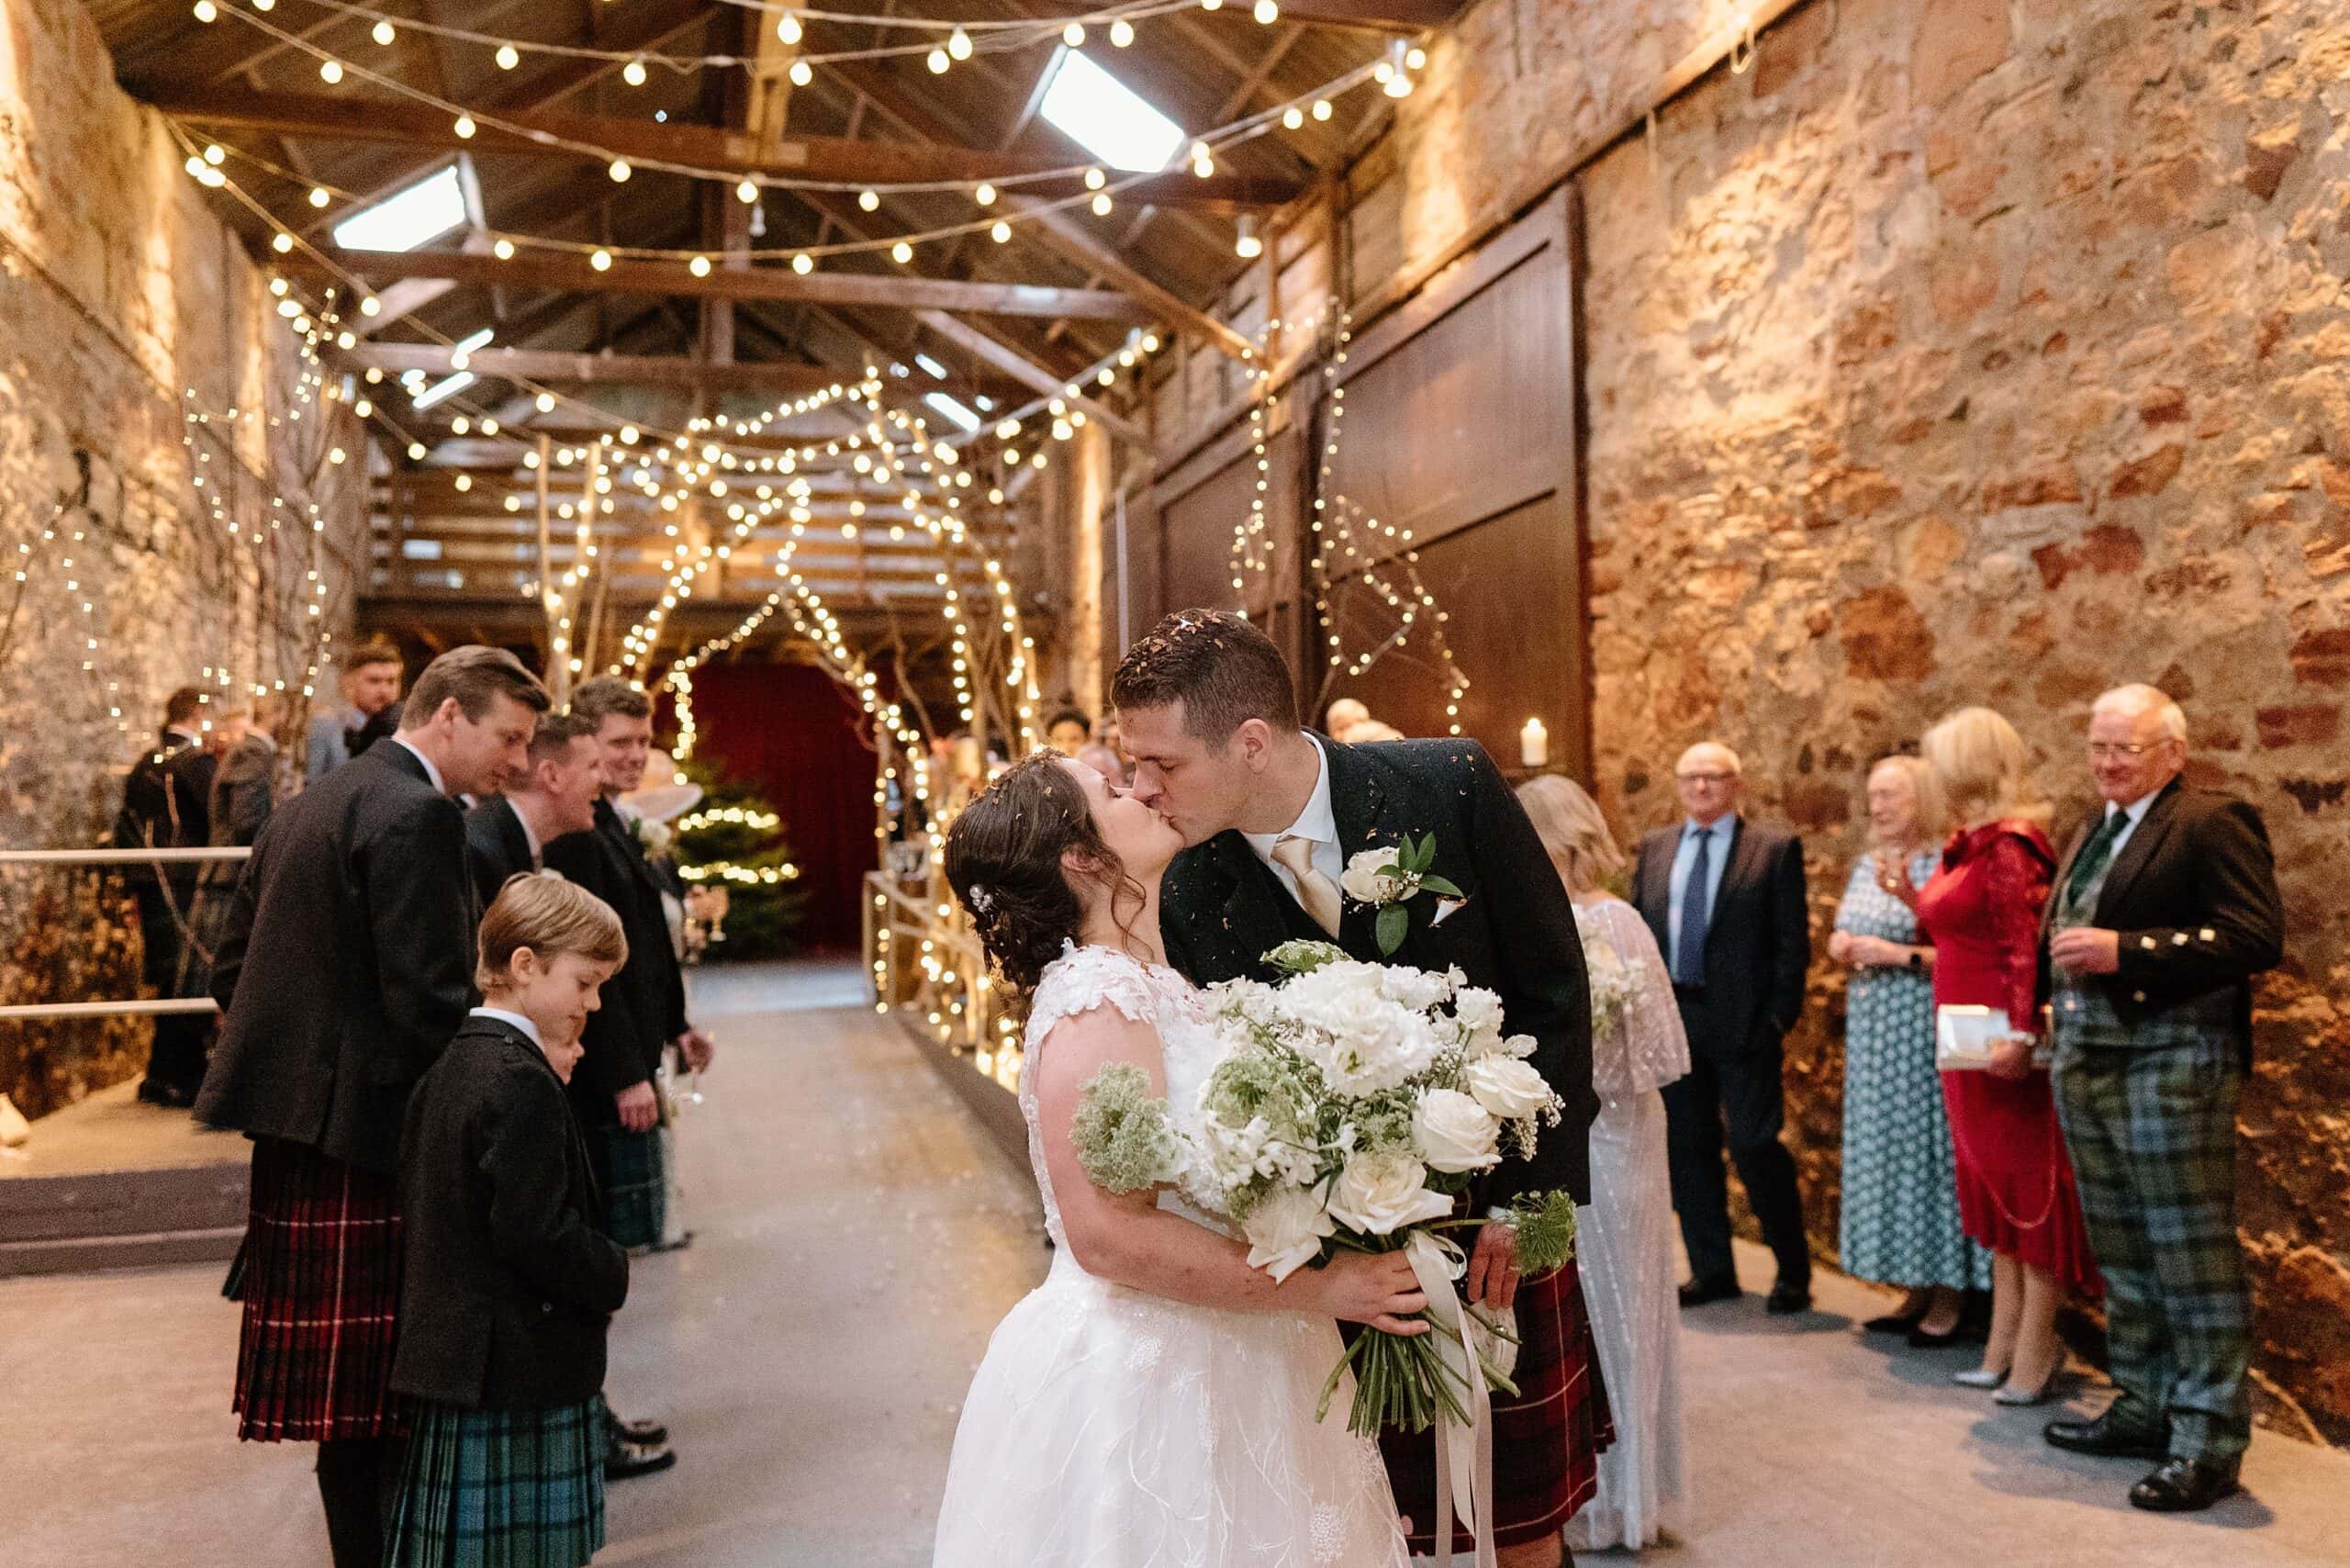 kinkell byre wedding photos interior inside view of farm barn wedding venue st andrews scotland with fairy lights with bride and groom